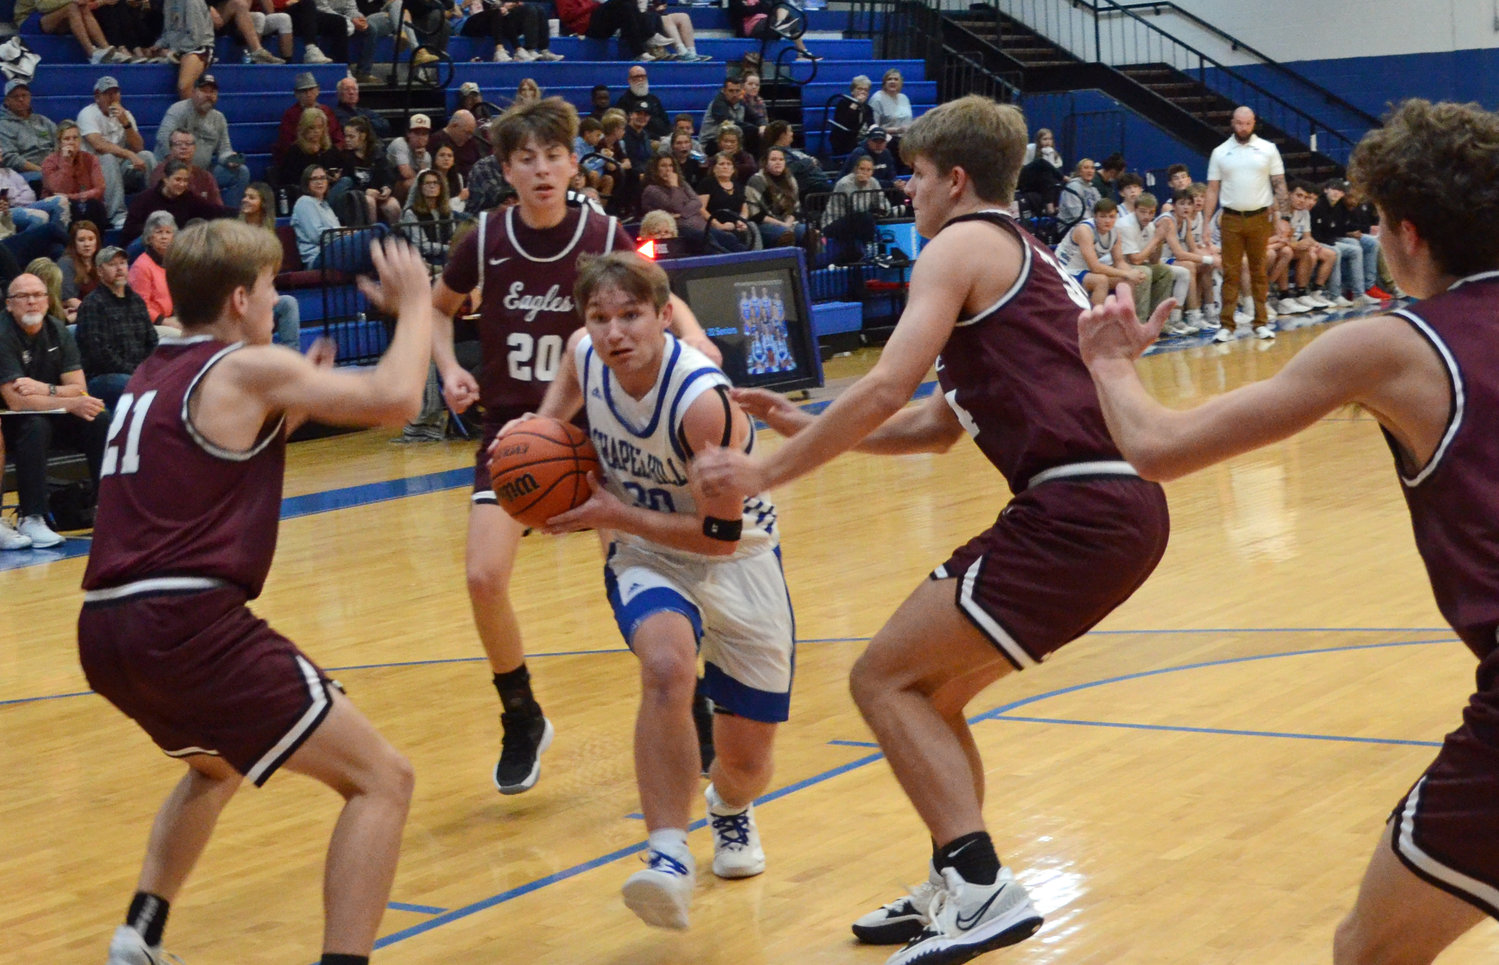 Andrew Timmons (30) drives through the entire Eagleville defense on his way to a layup and two of his team-high 13 points in the contest.